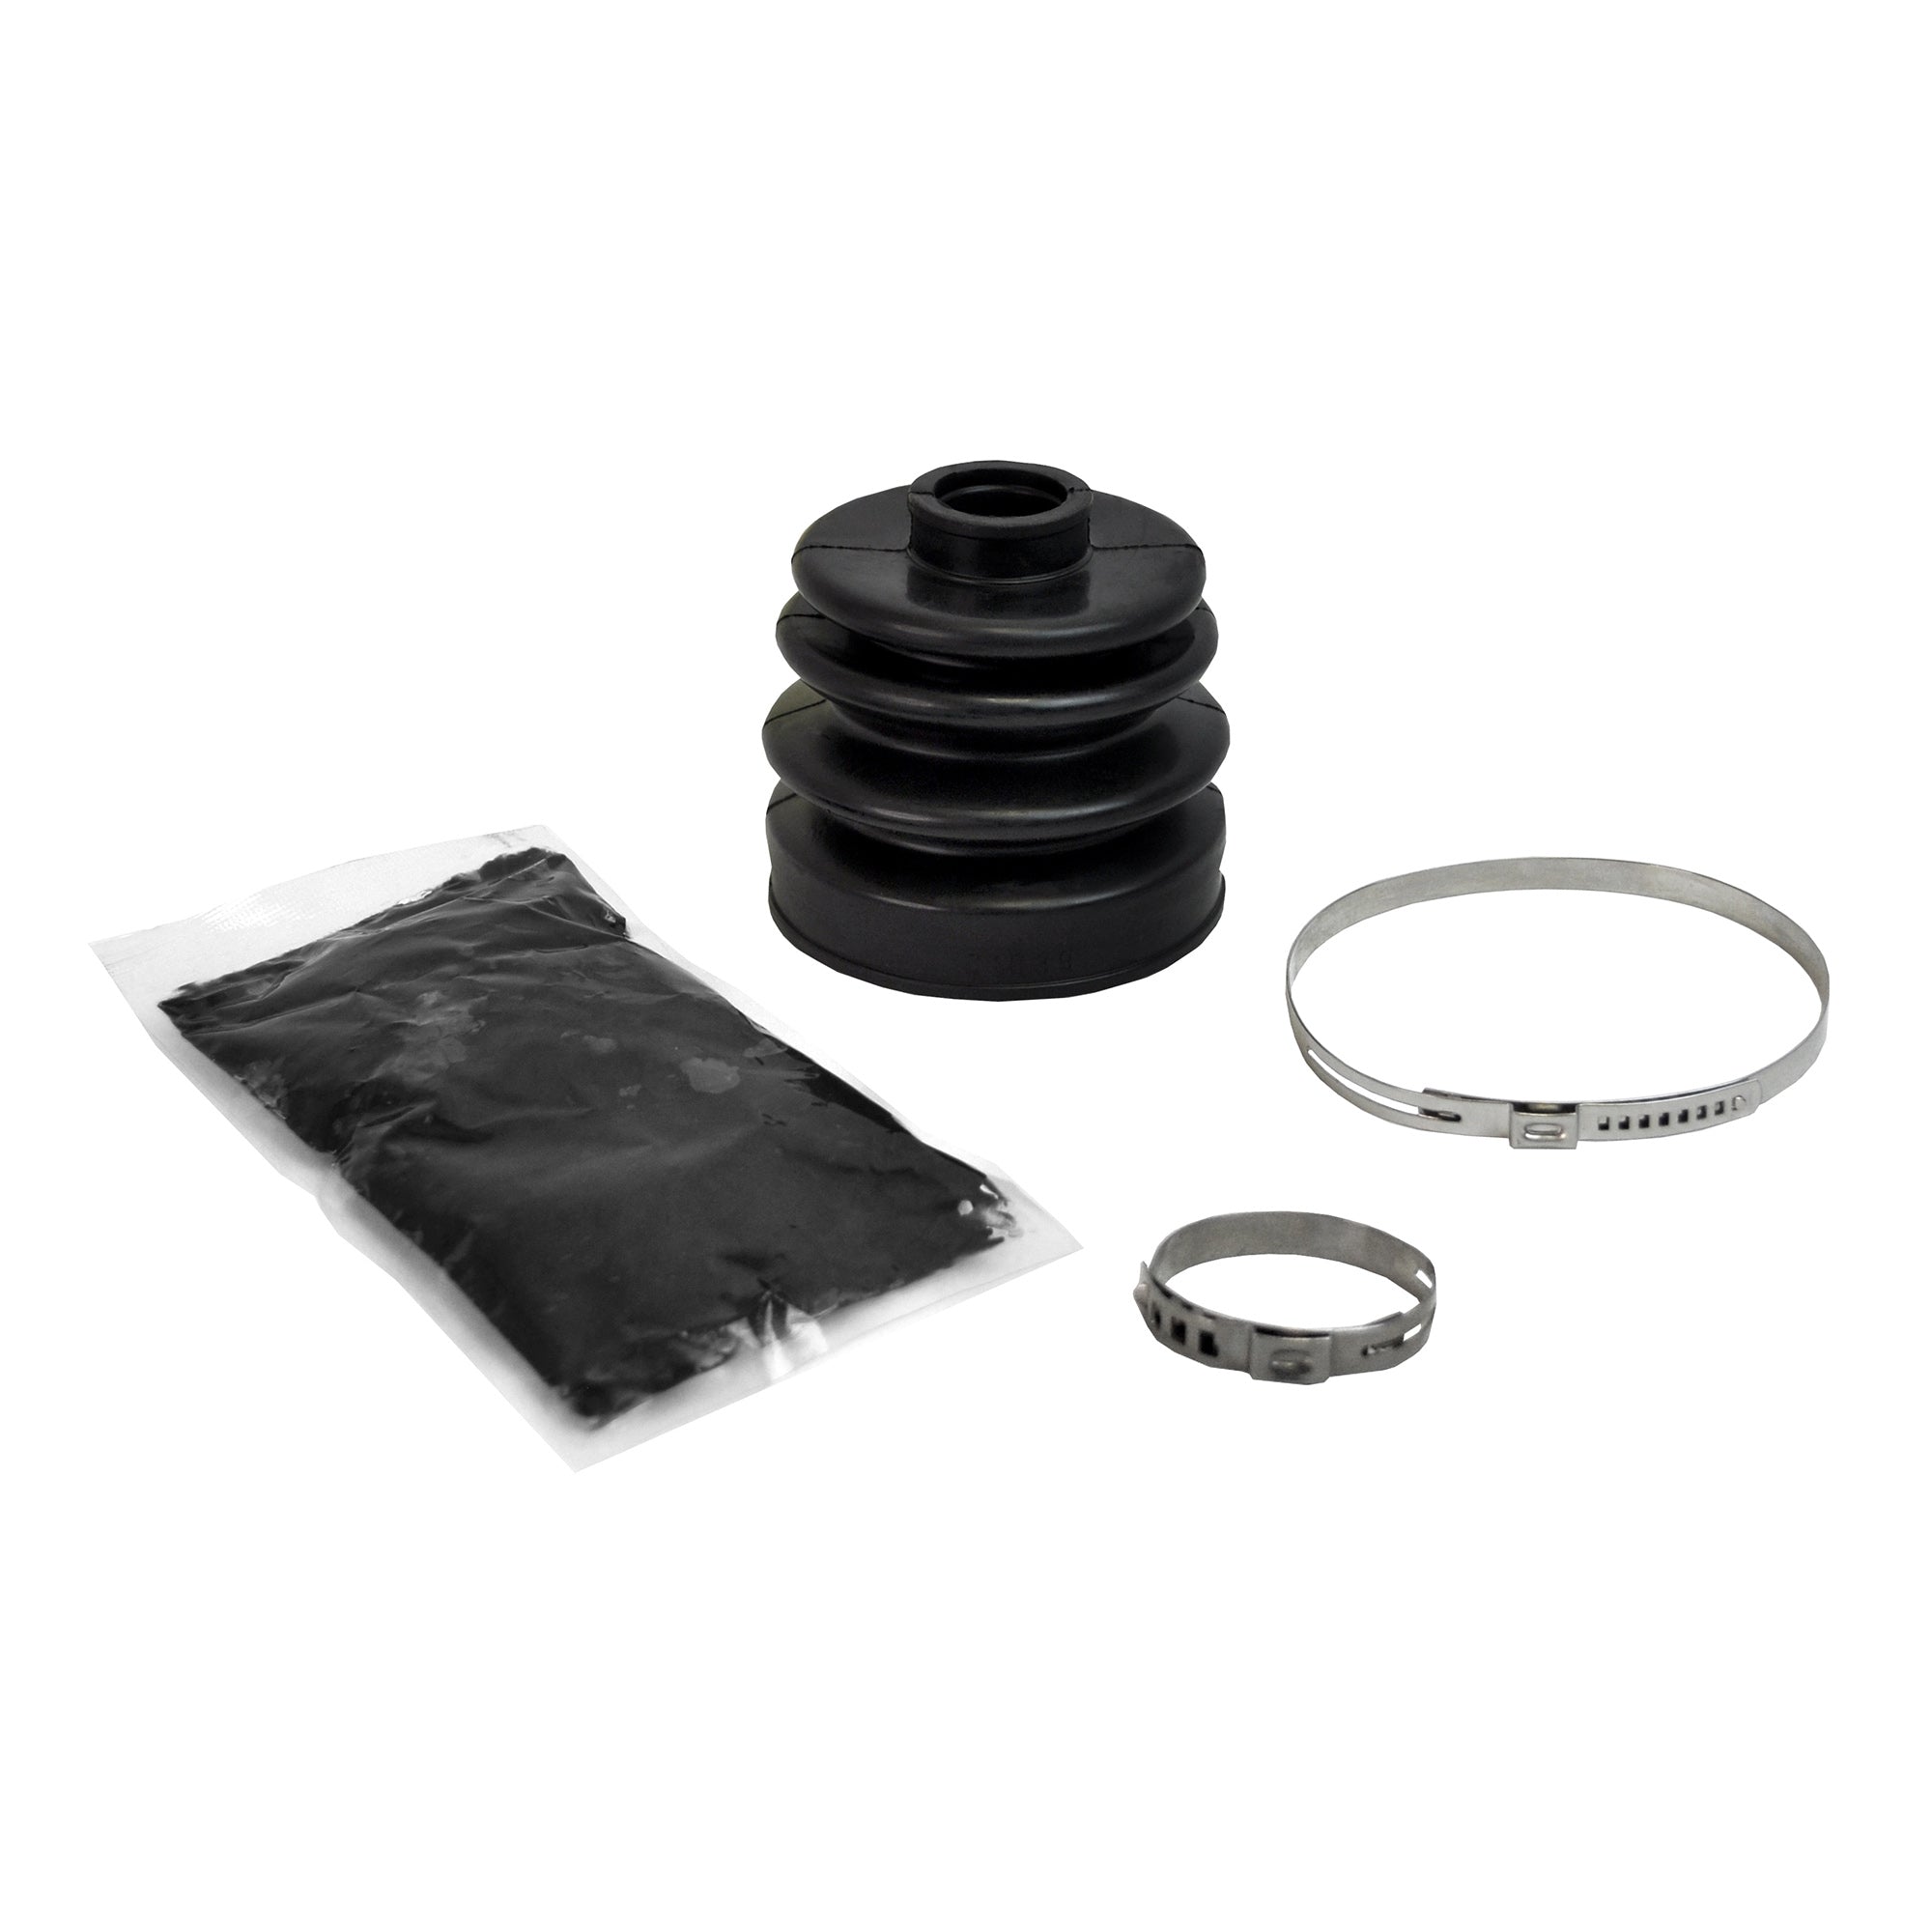 Polaris Worker 335 Rugged OE Replacement Boot Kit